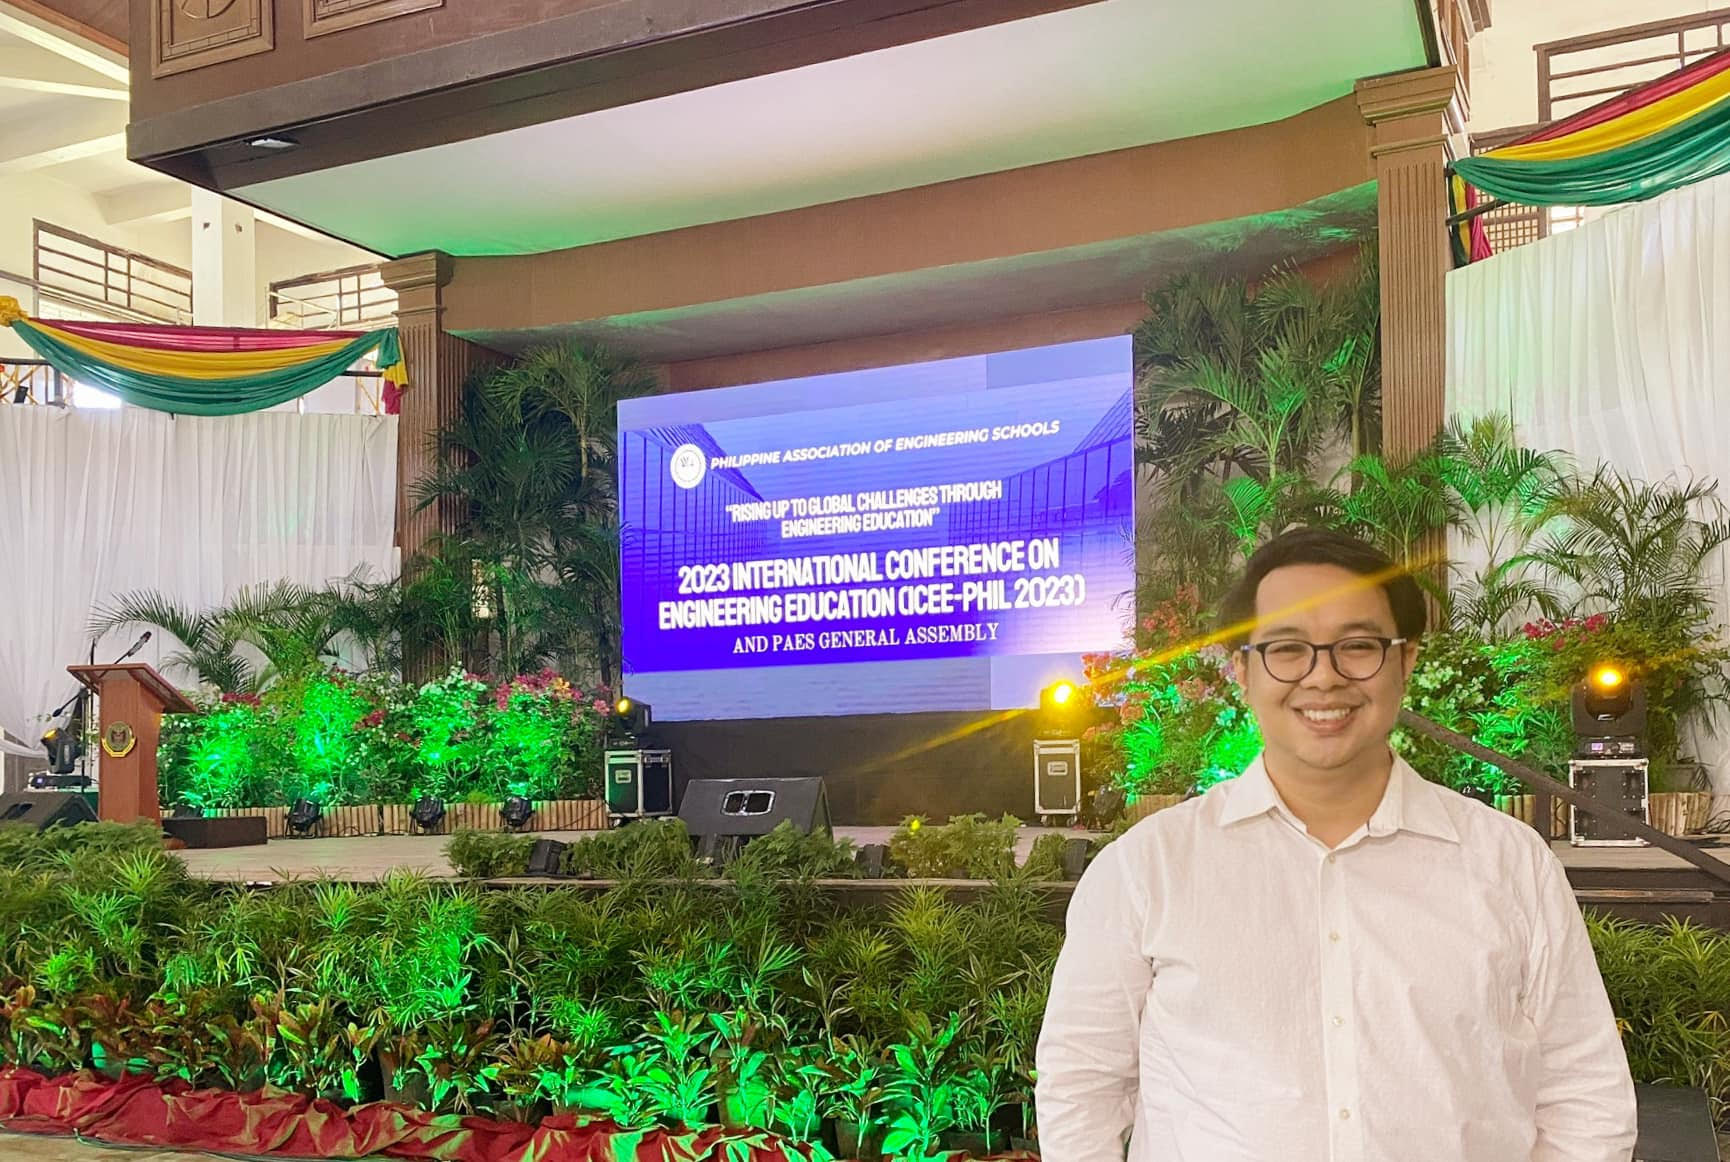 Dr. Recto is the new Second Vice President of the Philippine Association of Engineering Schools